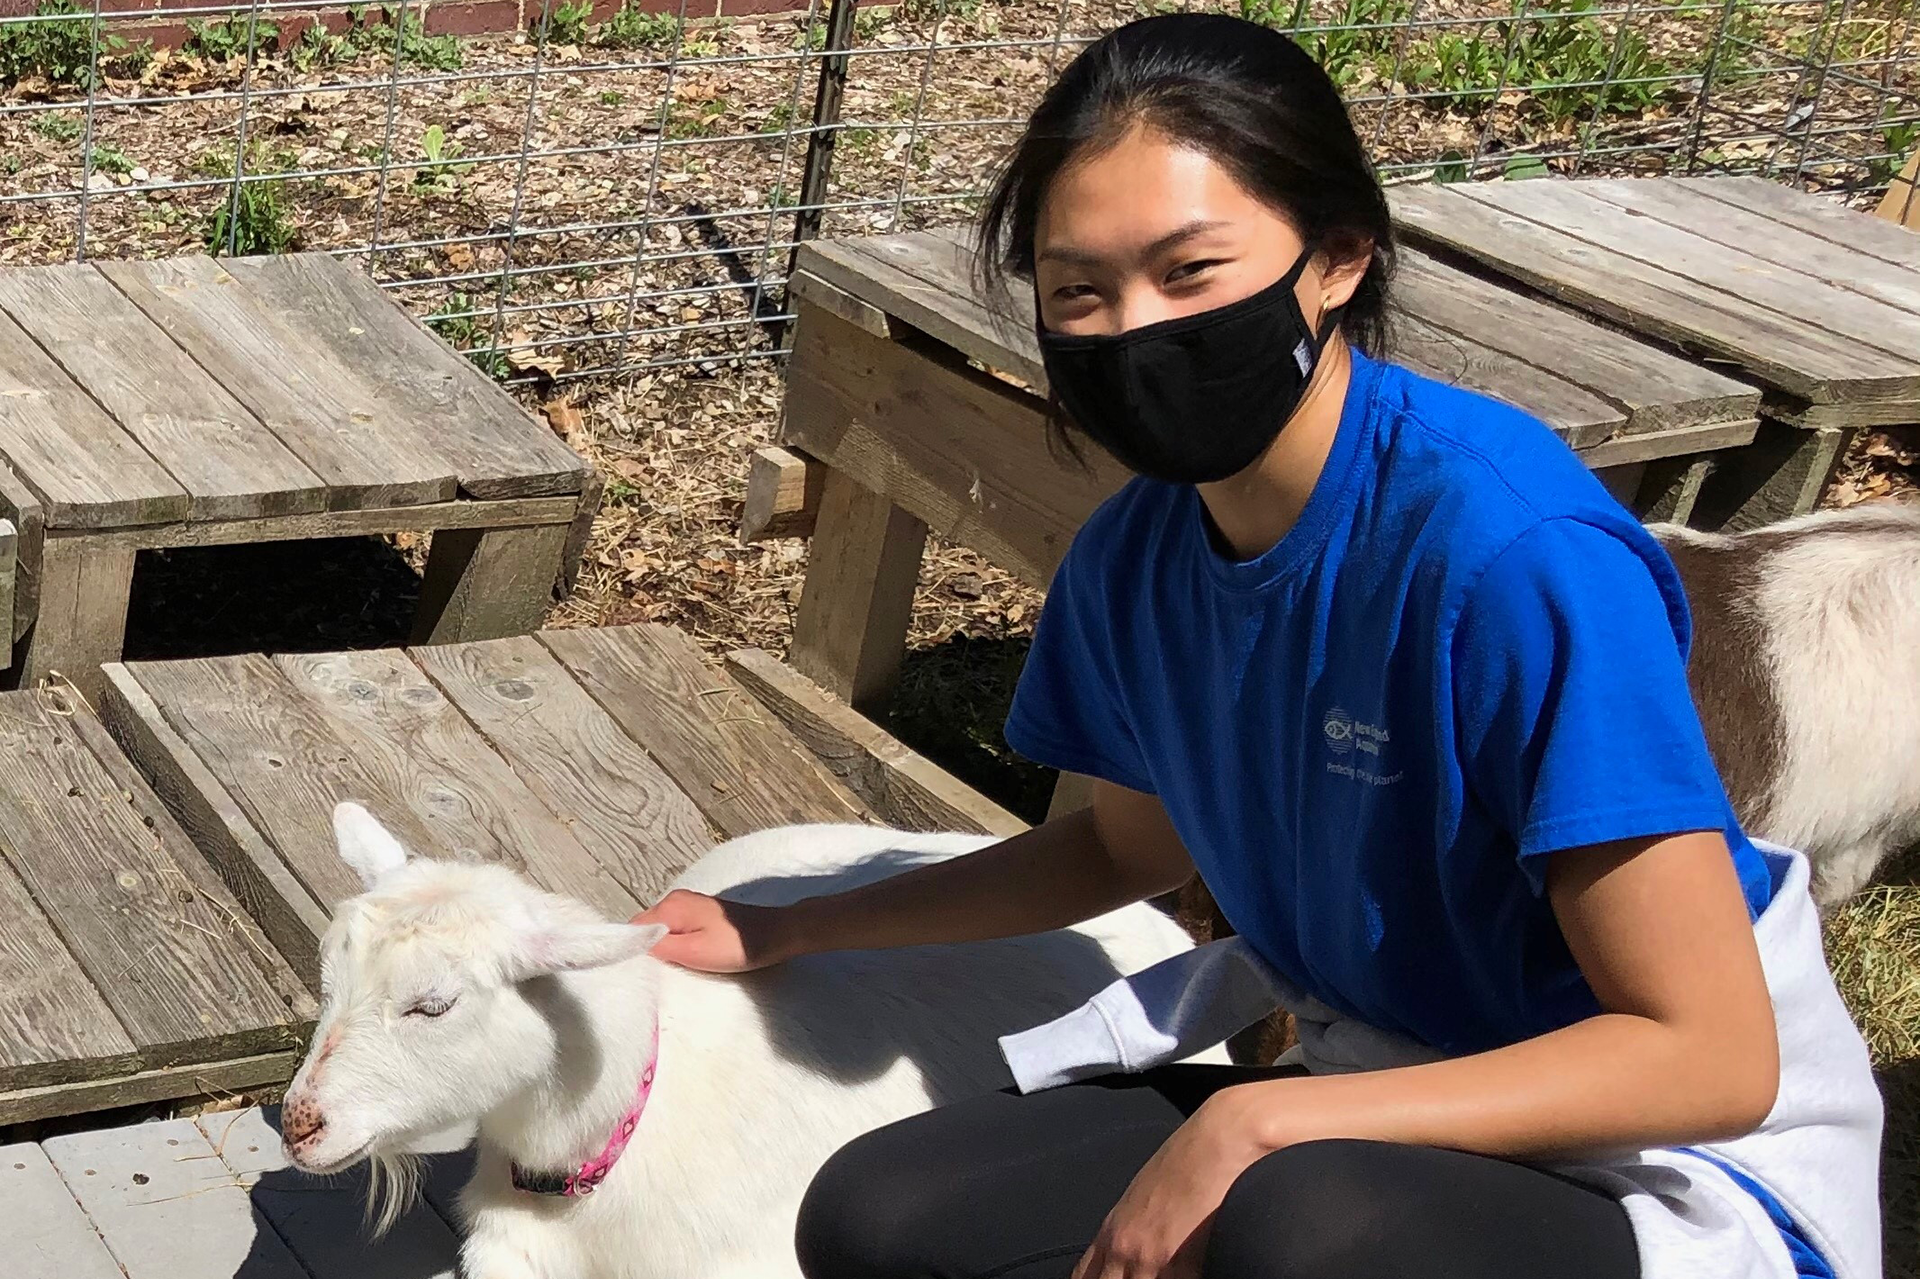 Young girl with a blue shirt and black face mask, petting a goat.